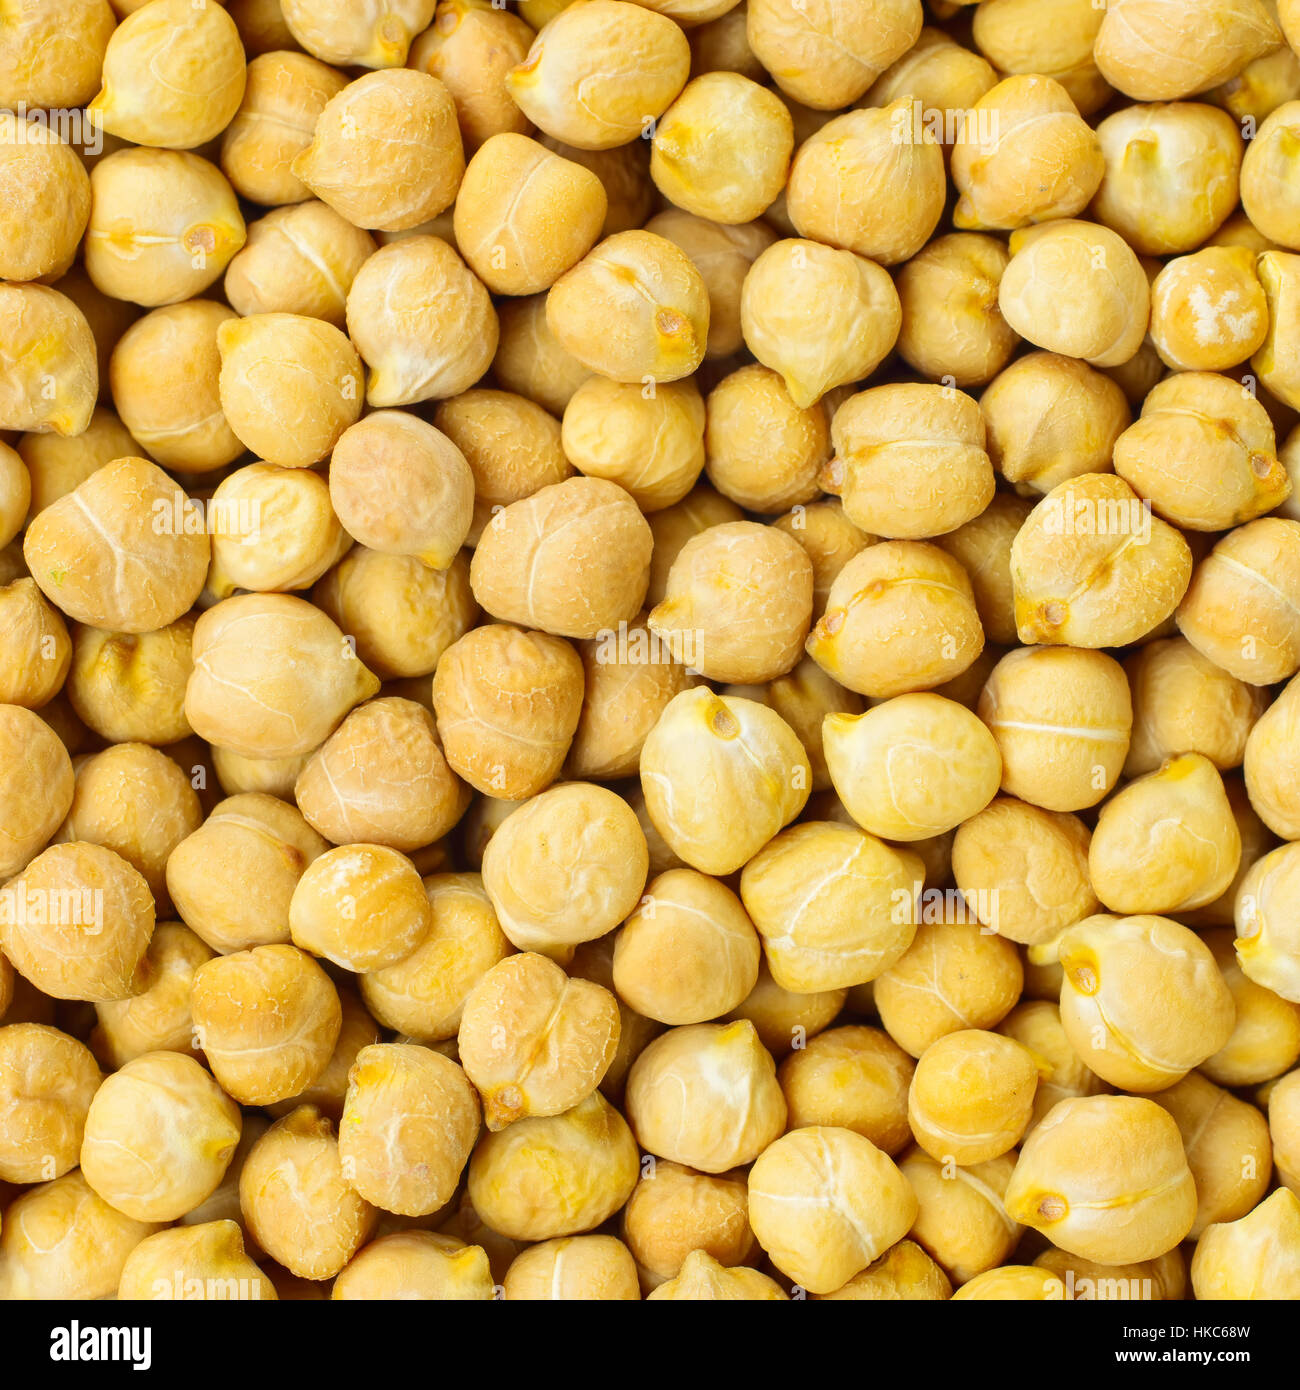 Chickpea seeds background or texture raw legume food Stock Photo